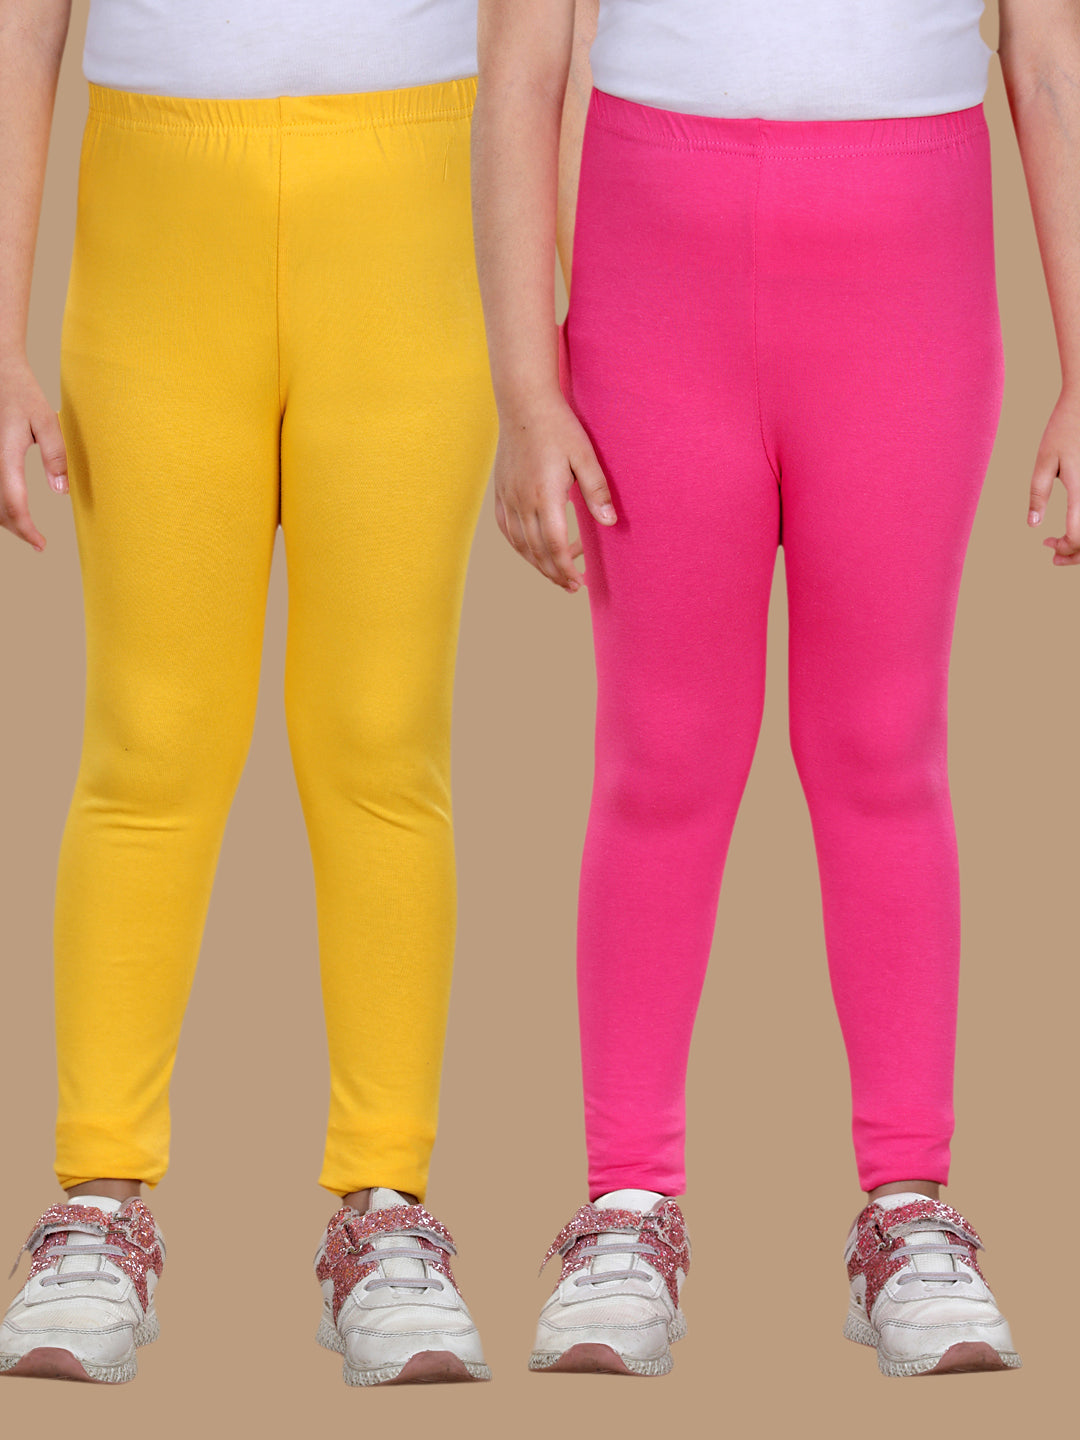 Girls Pack of 2 Solid Leggings- Yellow & Pink